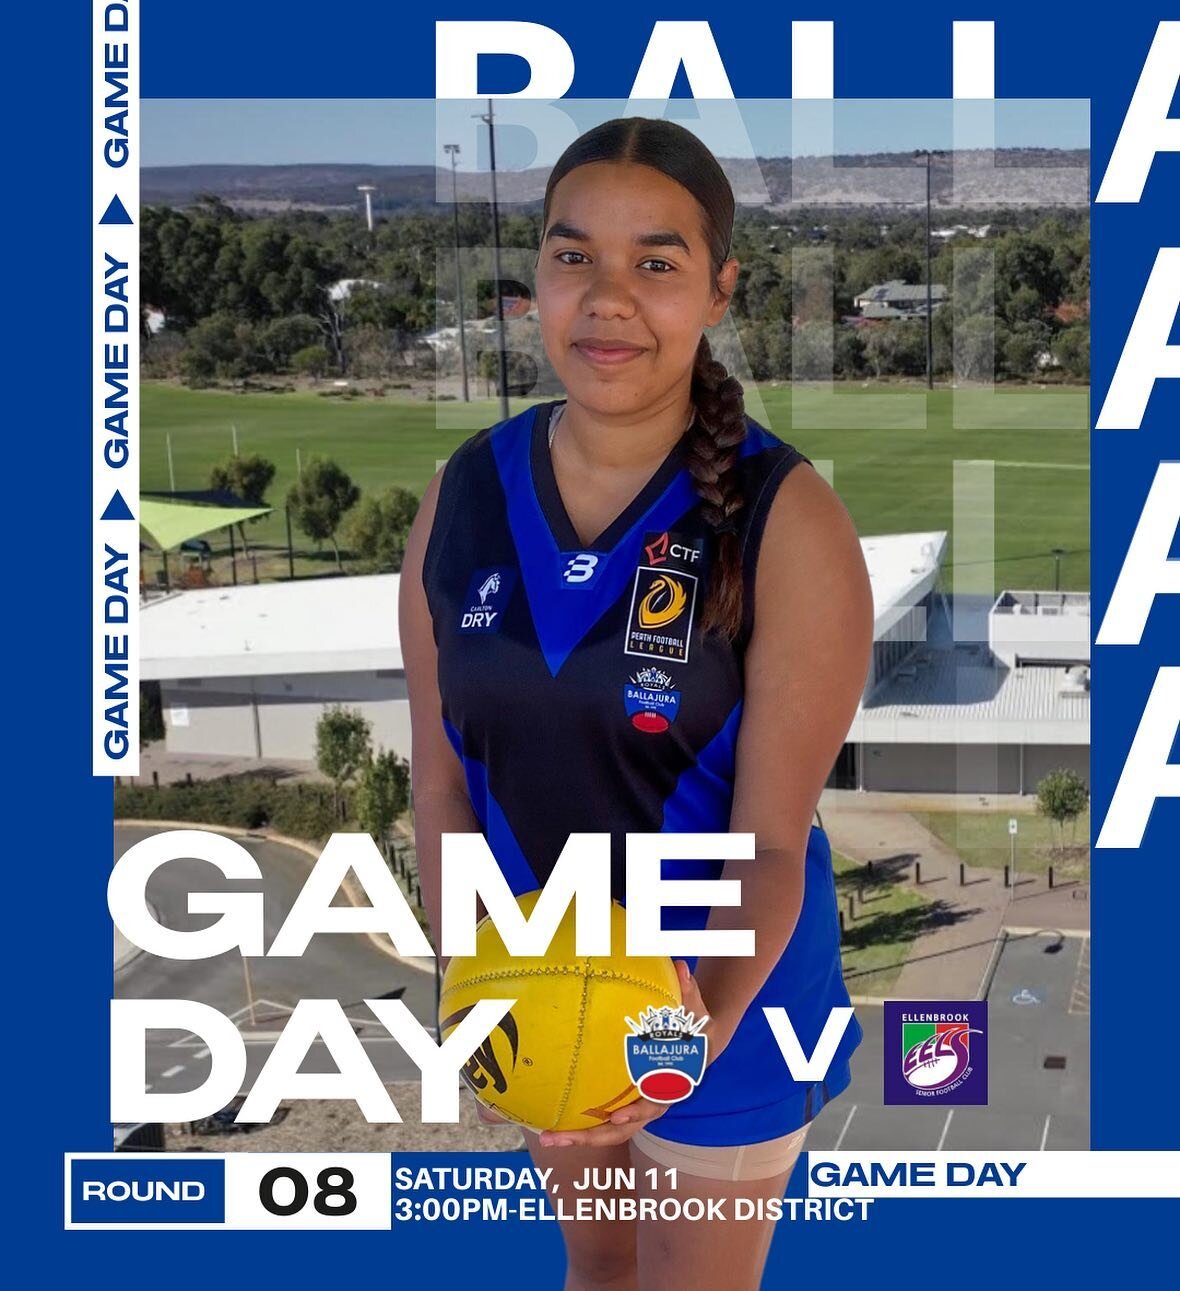 GAME DAY!
Round 8

Come down to Ellenbrook District and support our women as they take on Ellenbrook 

Bounce down 3:00pm

#perthfooty #perthfootballleague #ballajura #womeninsports